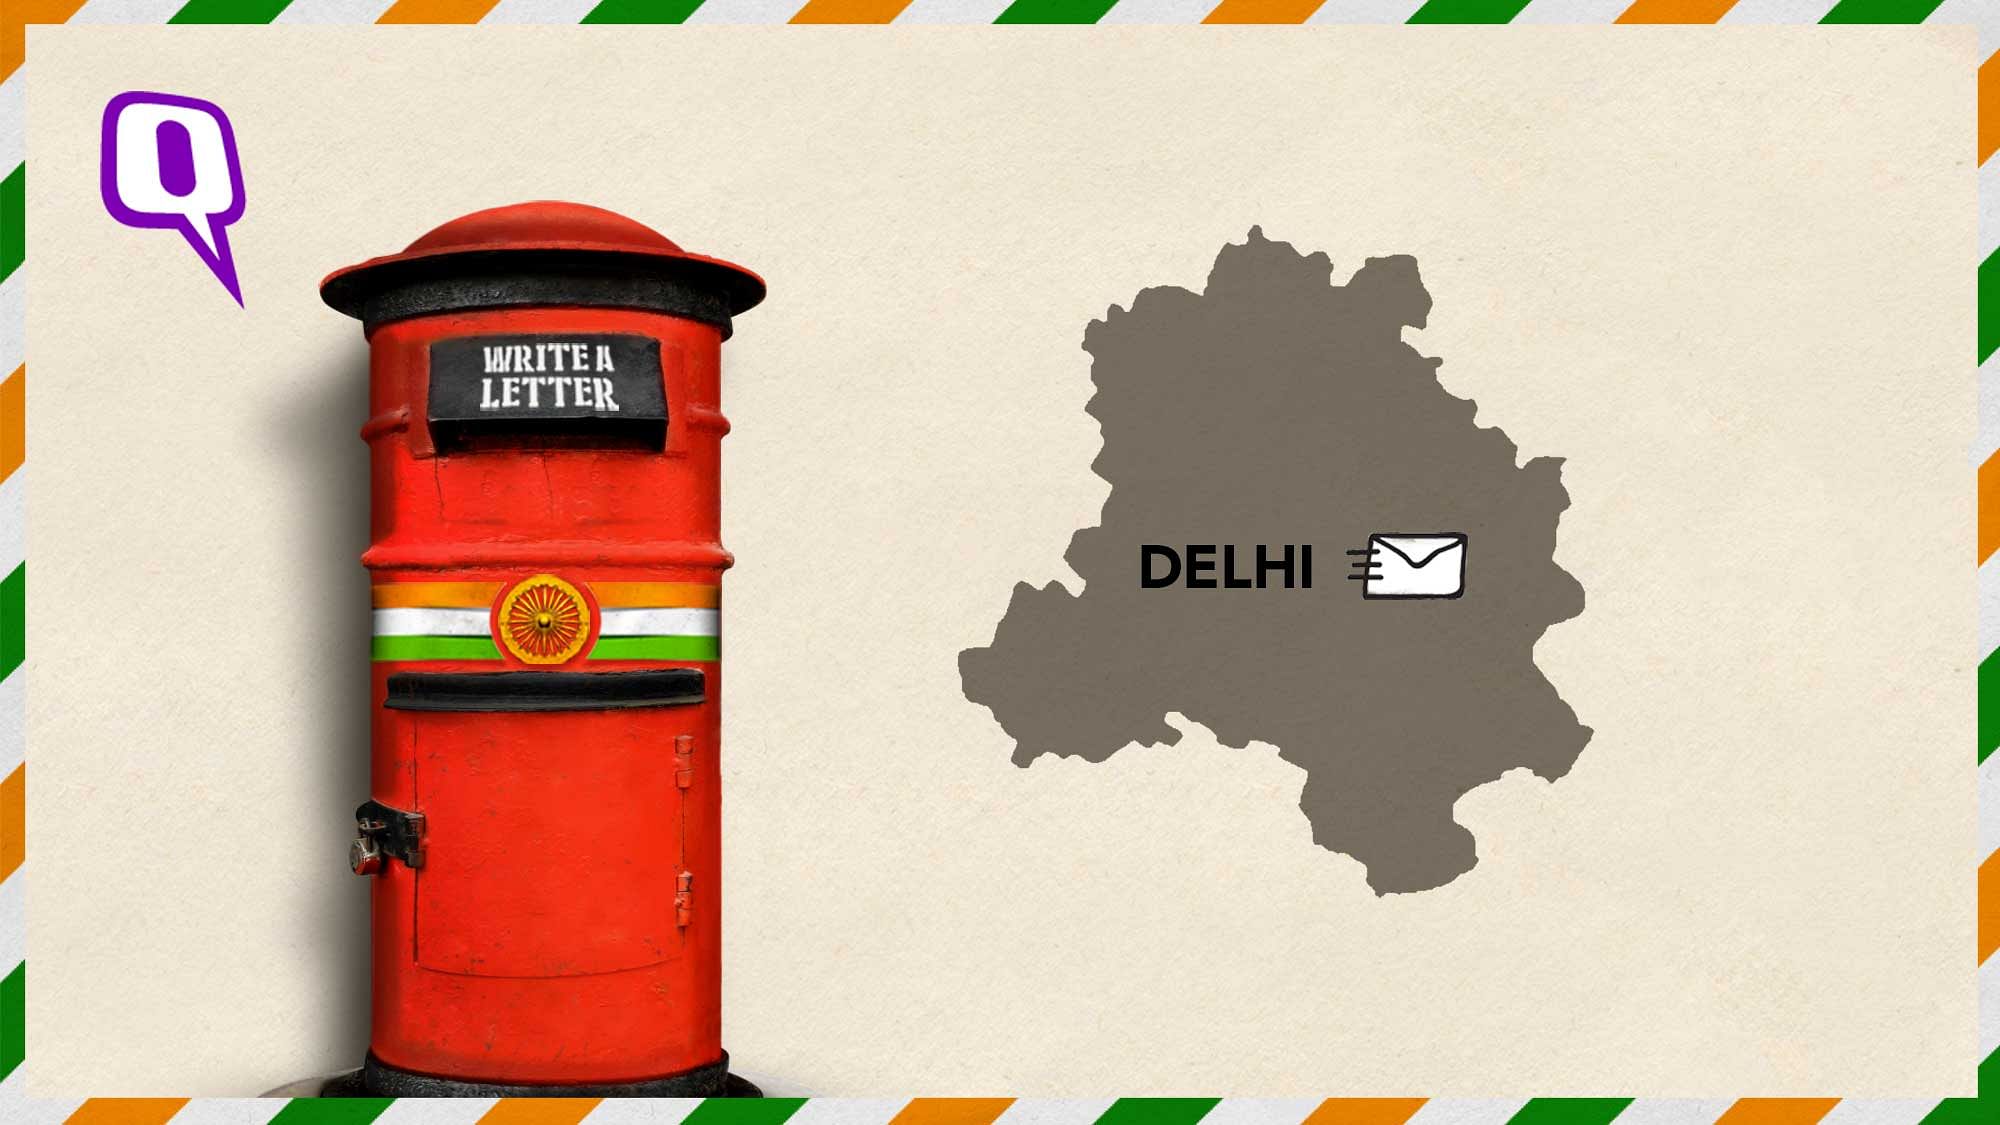 Kavita from Delhi recites her letter to India for Republic Day 2020.